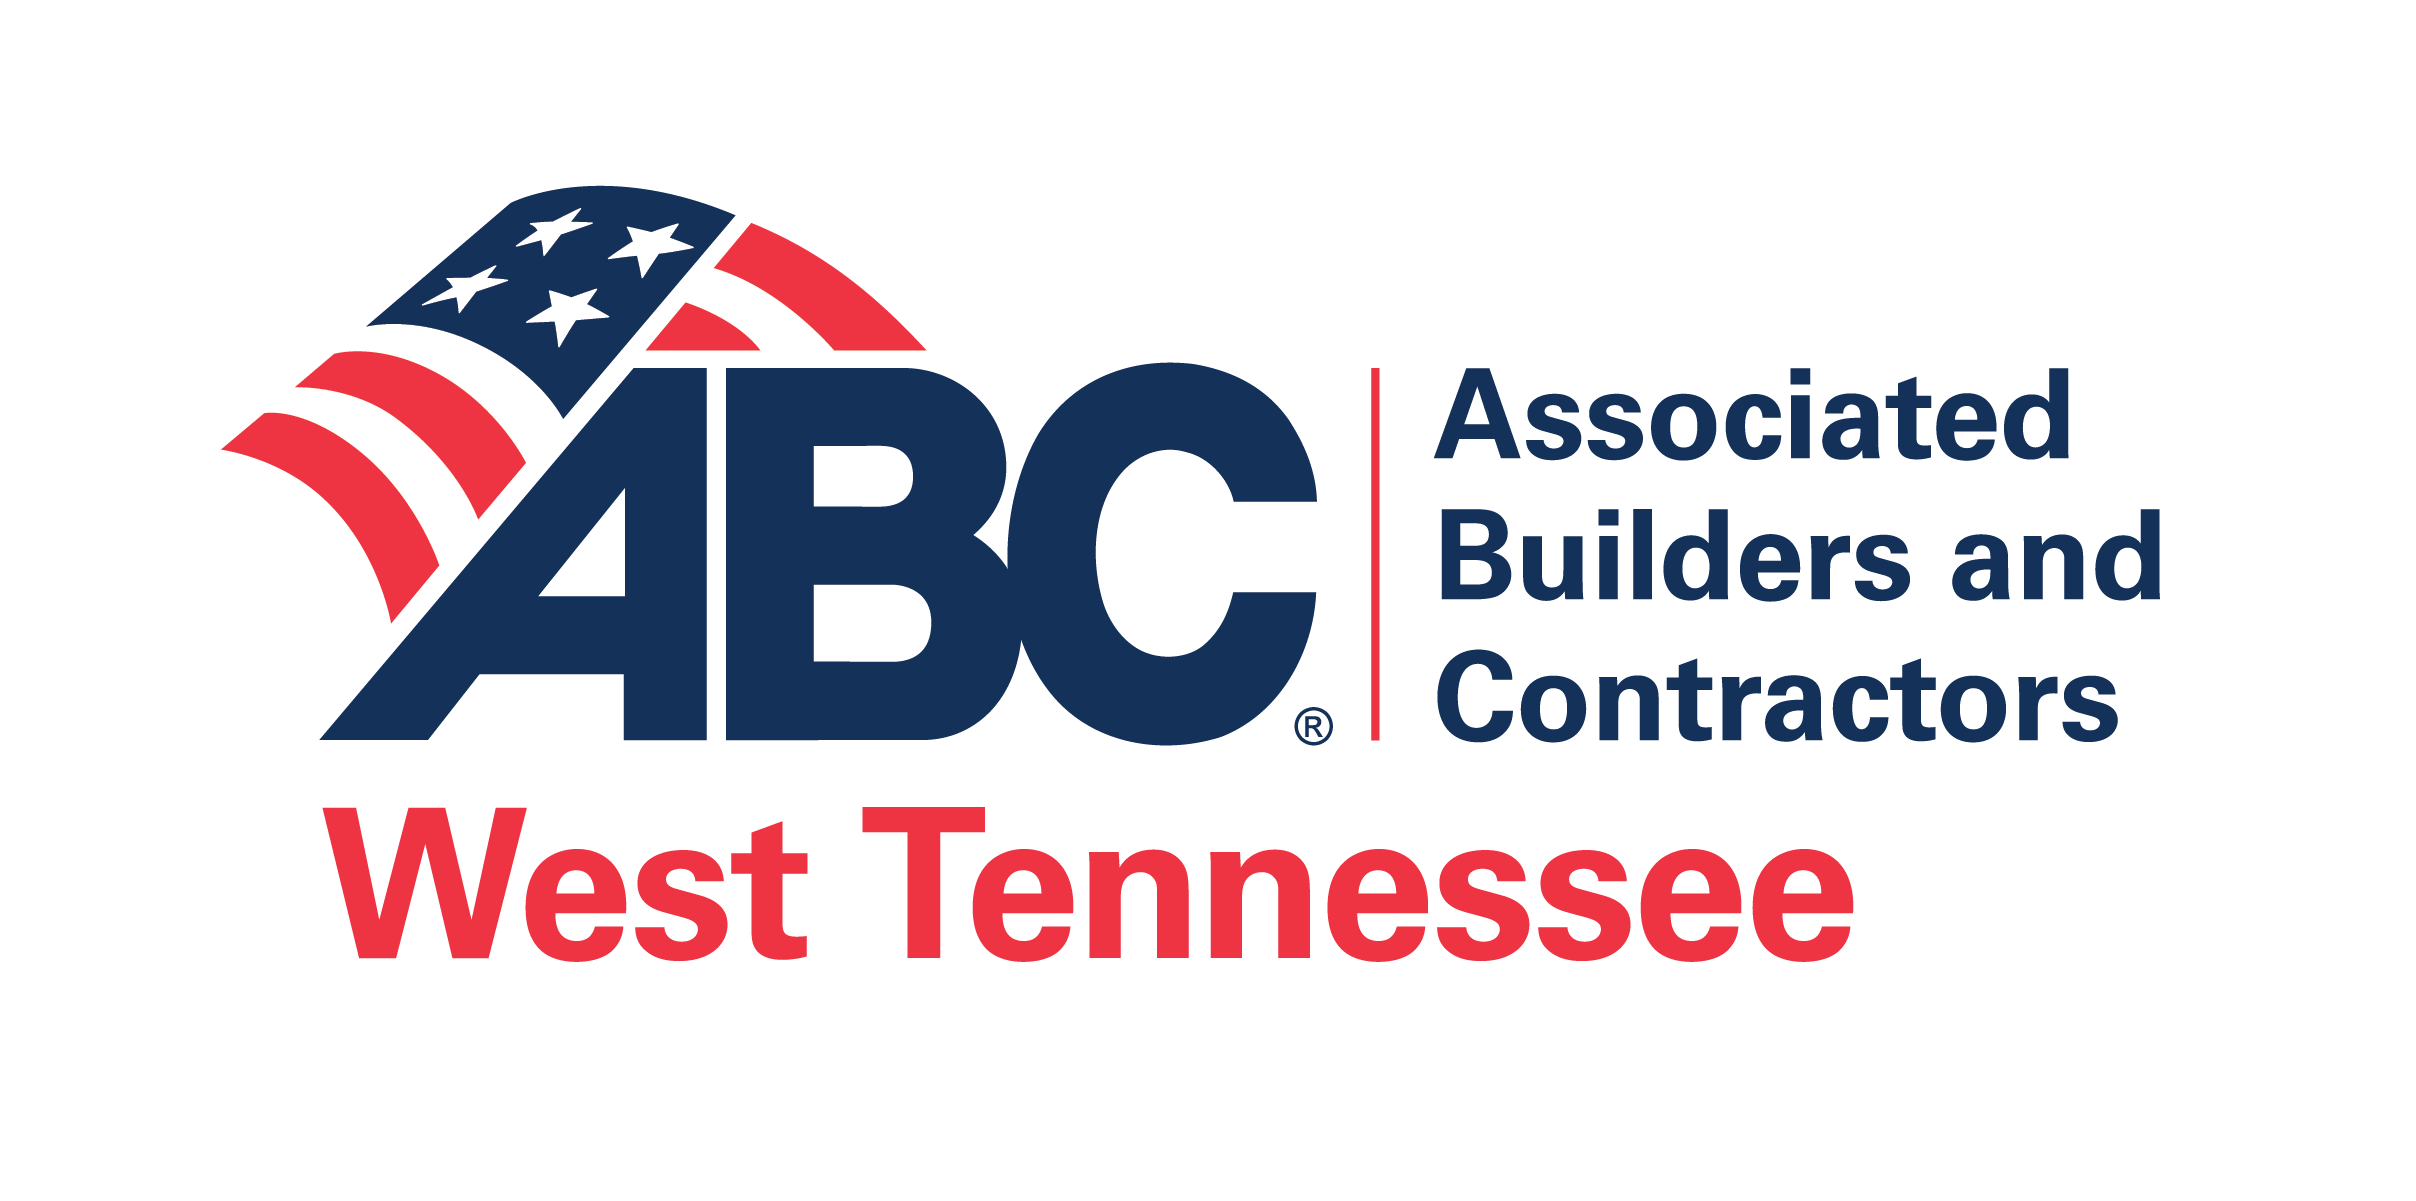 Associated Builders and Contractors - West Tennessee Chapter